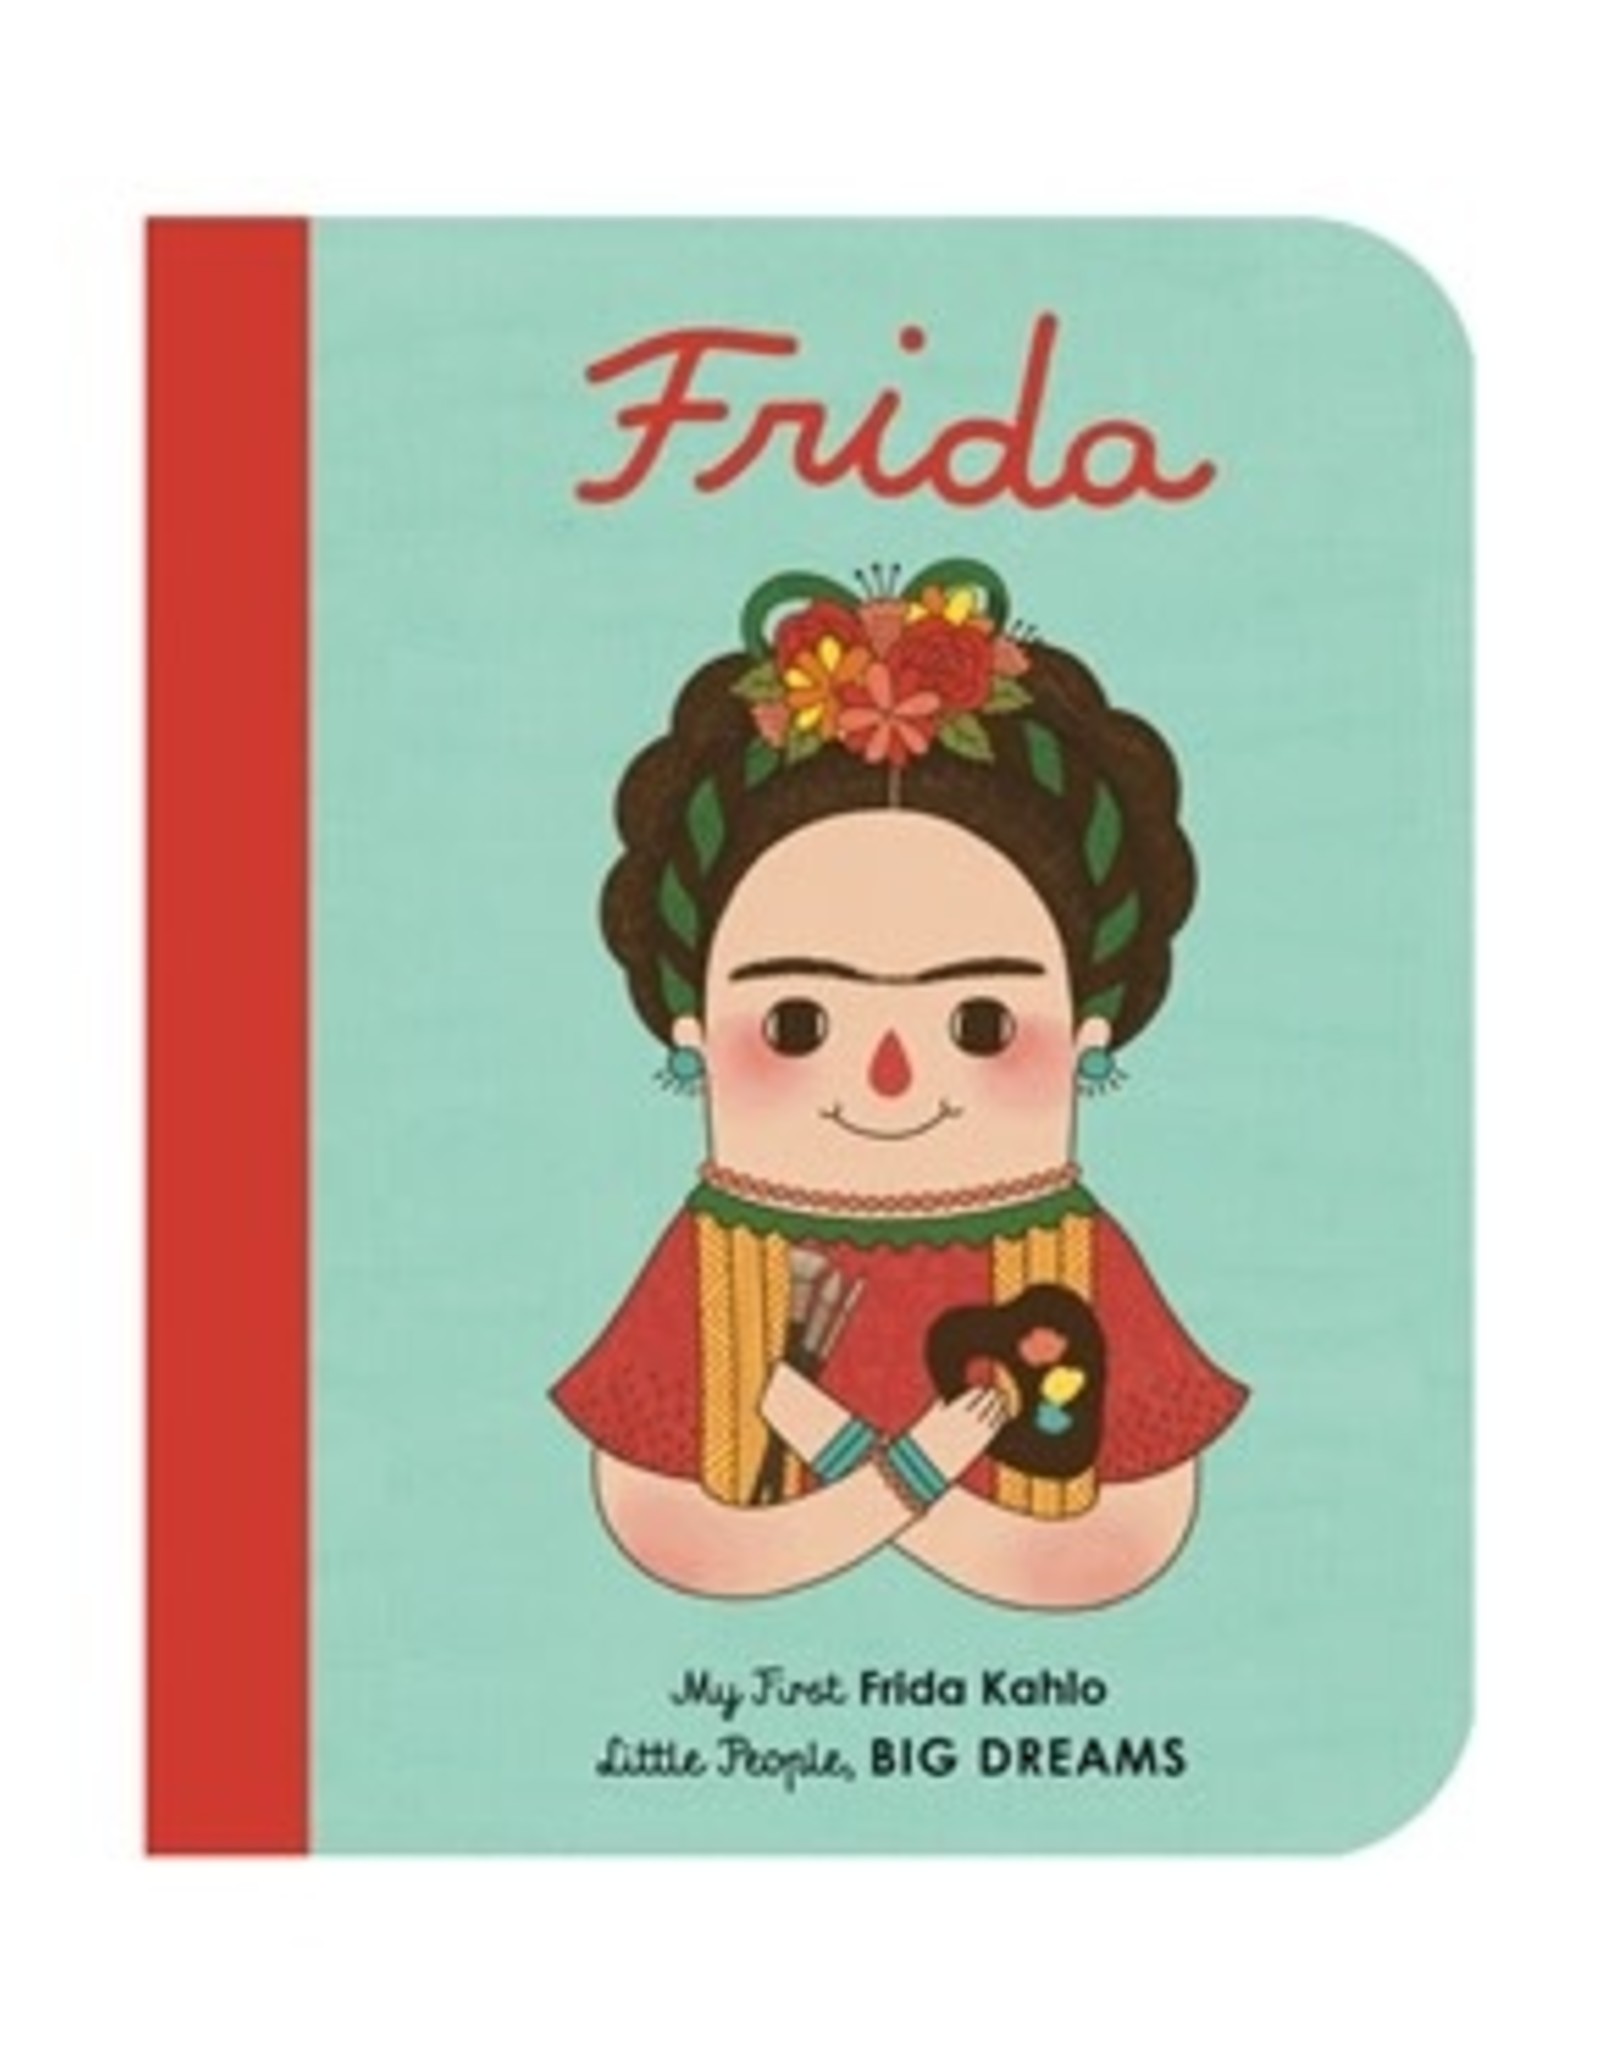 My First Frida Kahlo by Maria Isabel Sanchez Vegara and Gee Fan Eng